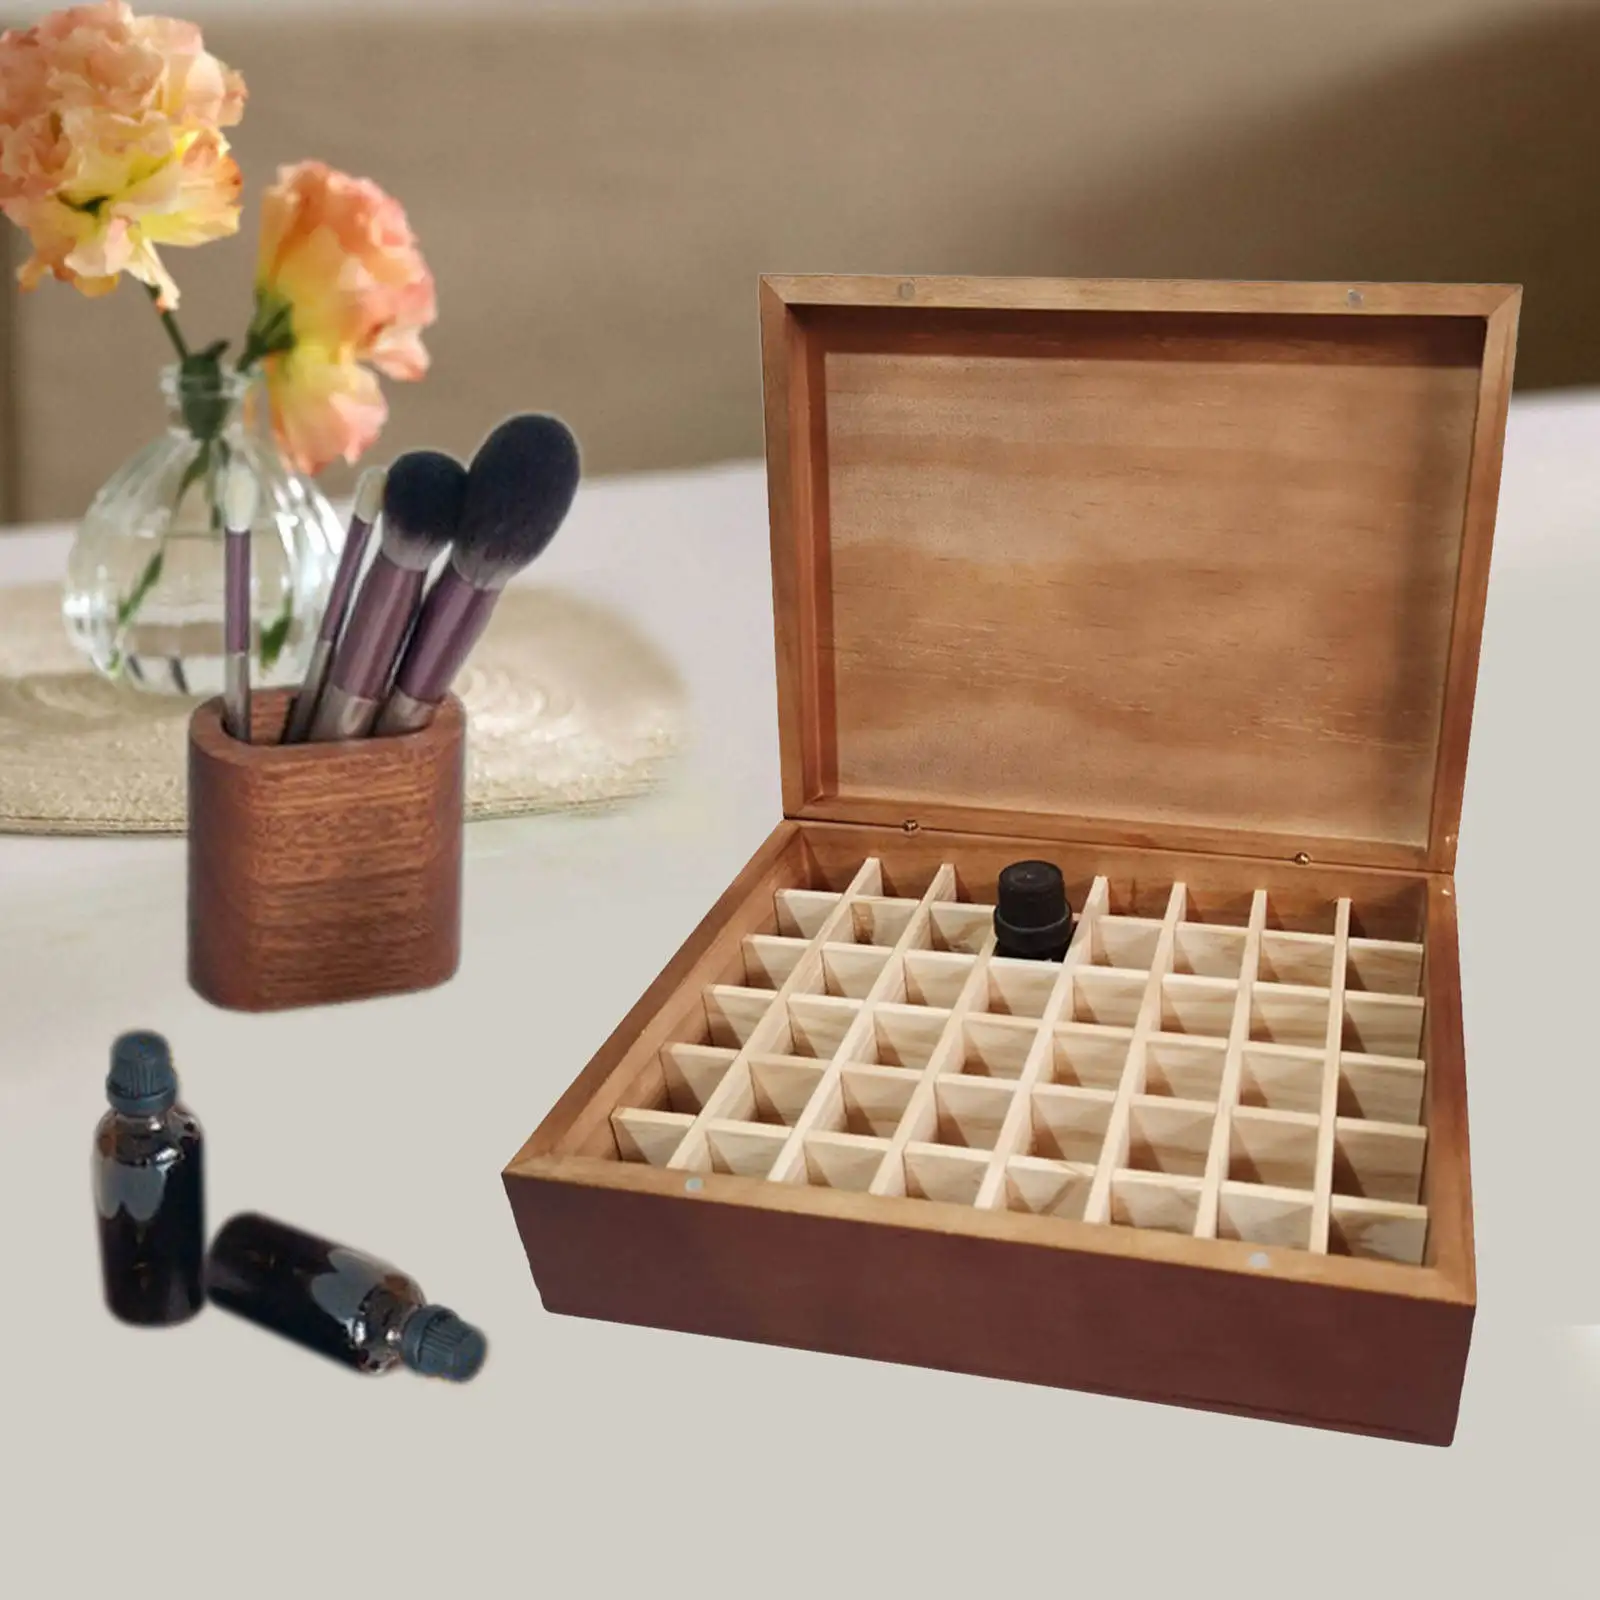 Essential Oil Storage Holder 48 Slots 5ml Display Lightweight Compact Wooden Aromatherapy Oil Container Cases Wooden Exhibit